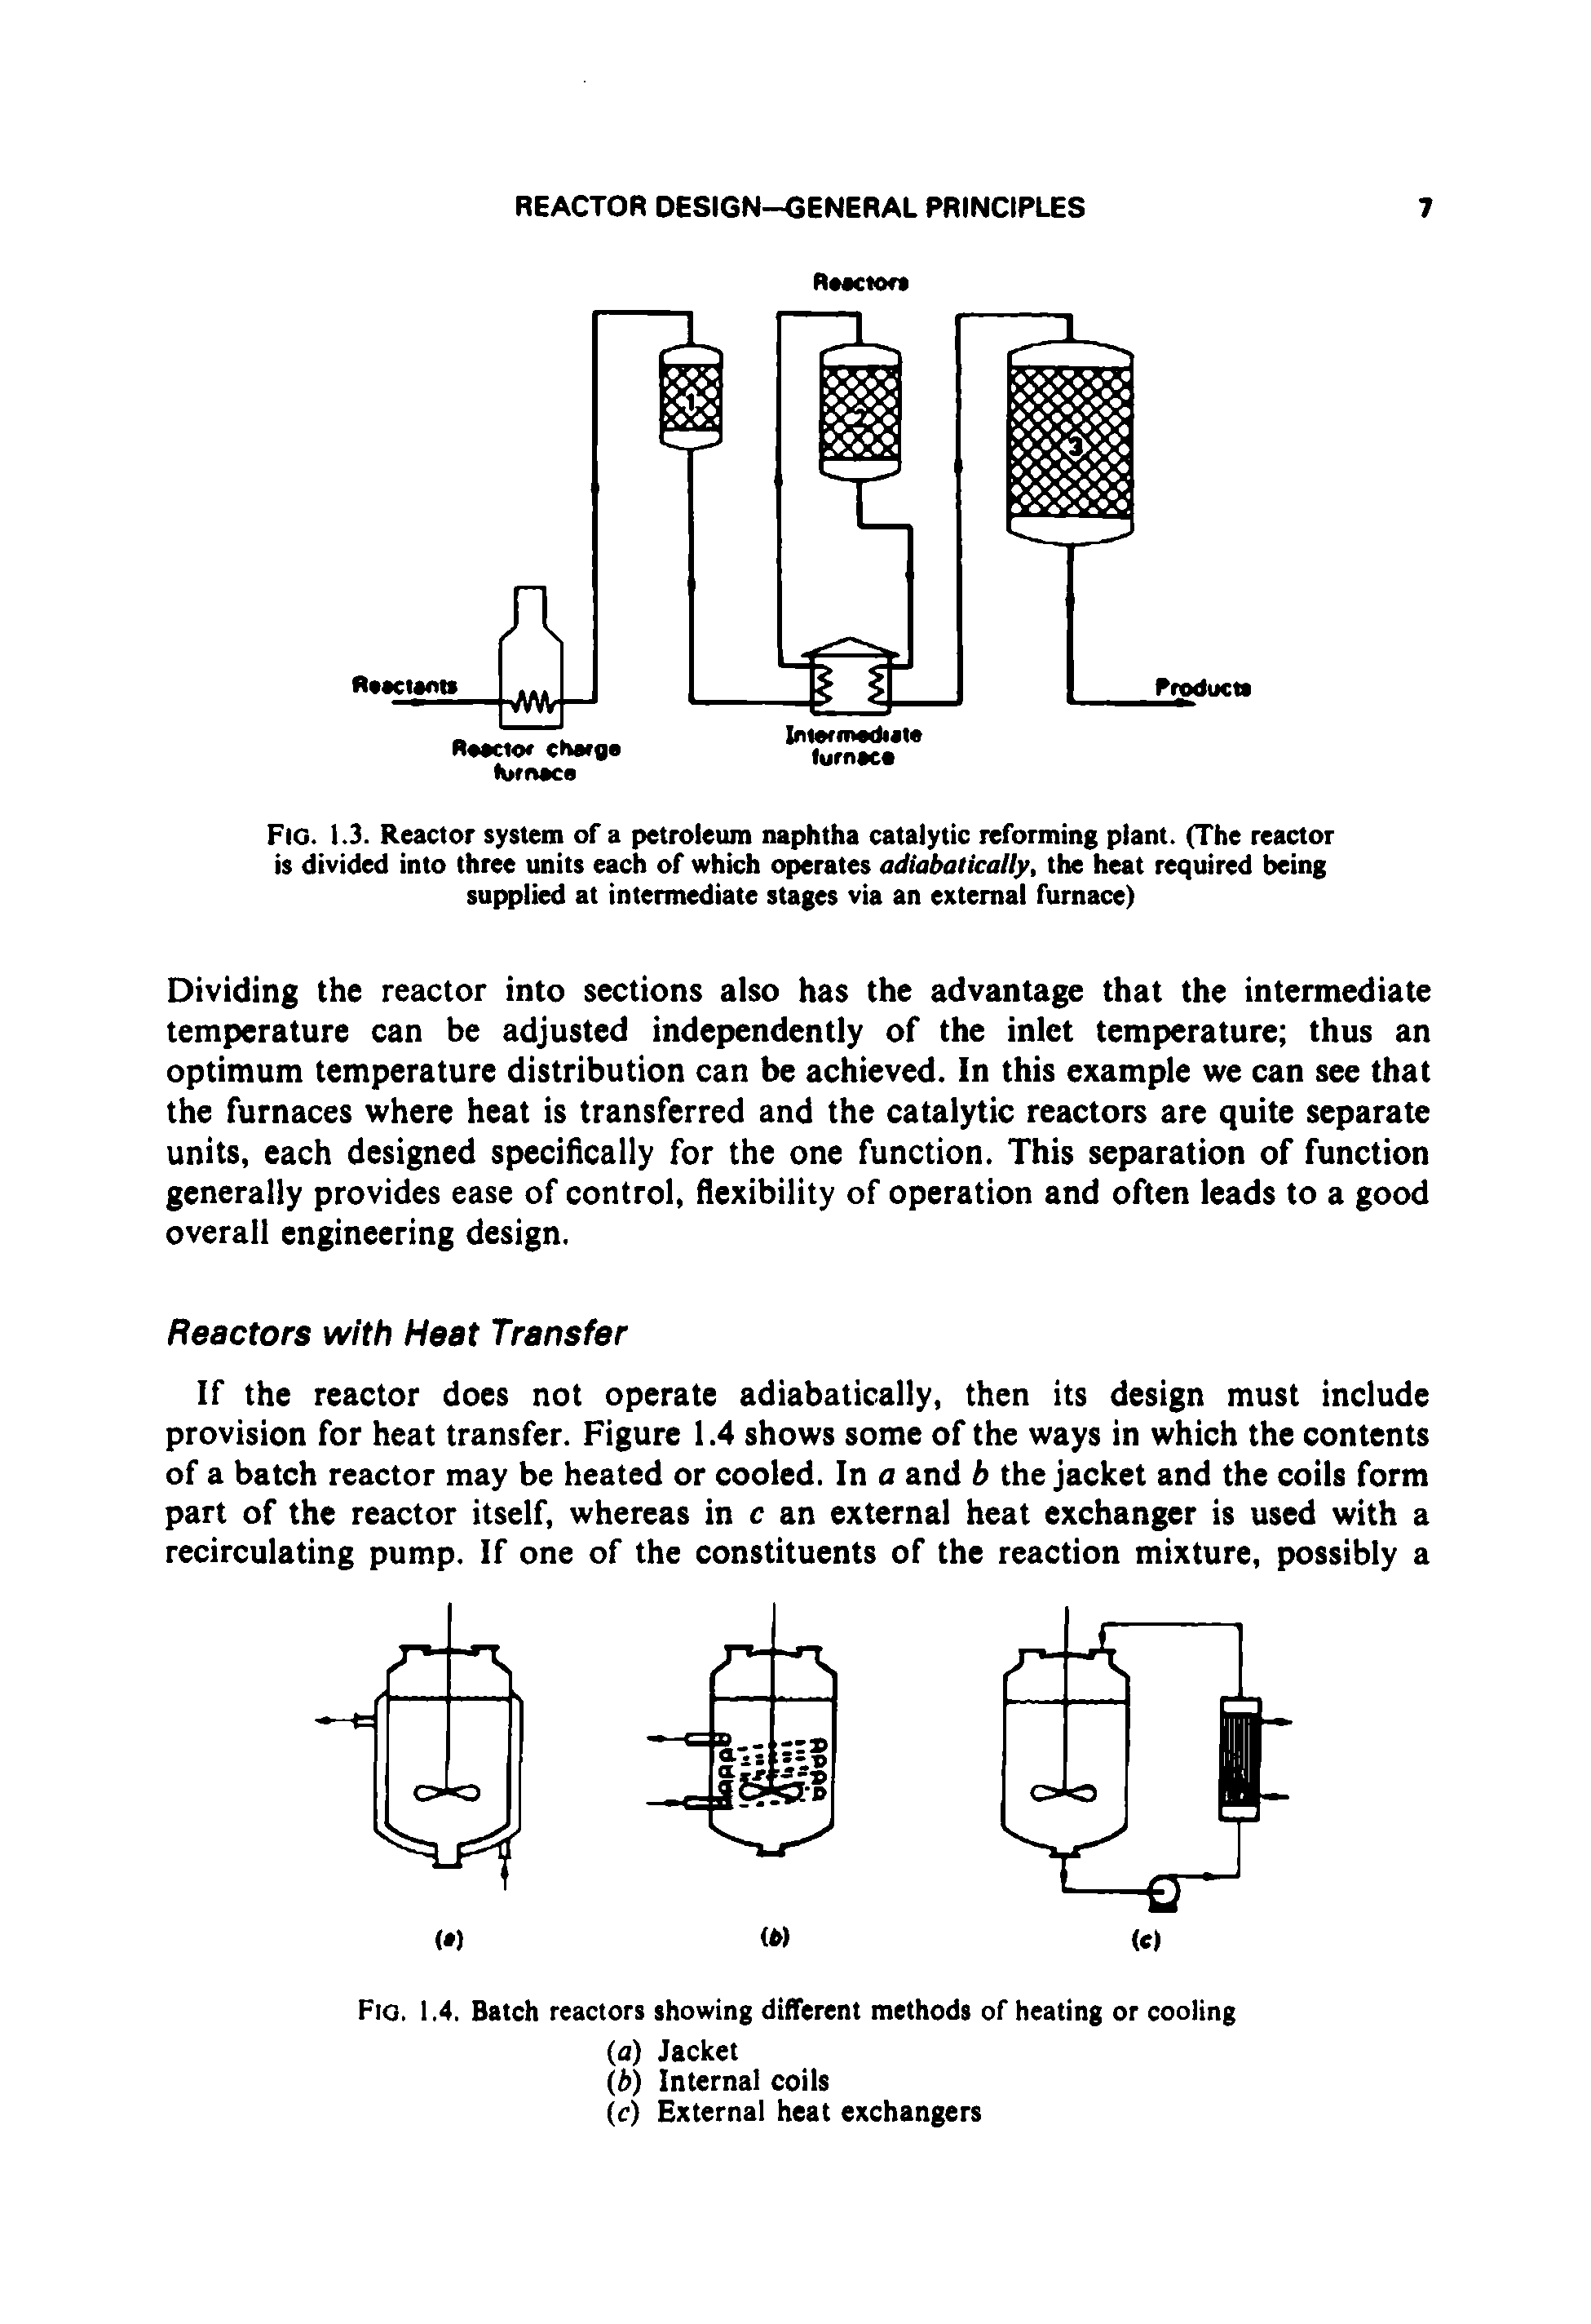 Fig. 1.3. Reactor system of a petroleum naphtha catalytic reforming plant. (The reactor is divided into three units each of which operates adiabatically, the heat required being supplied at intermediate stages via an external furnace)...